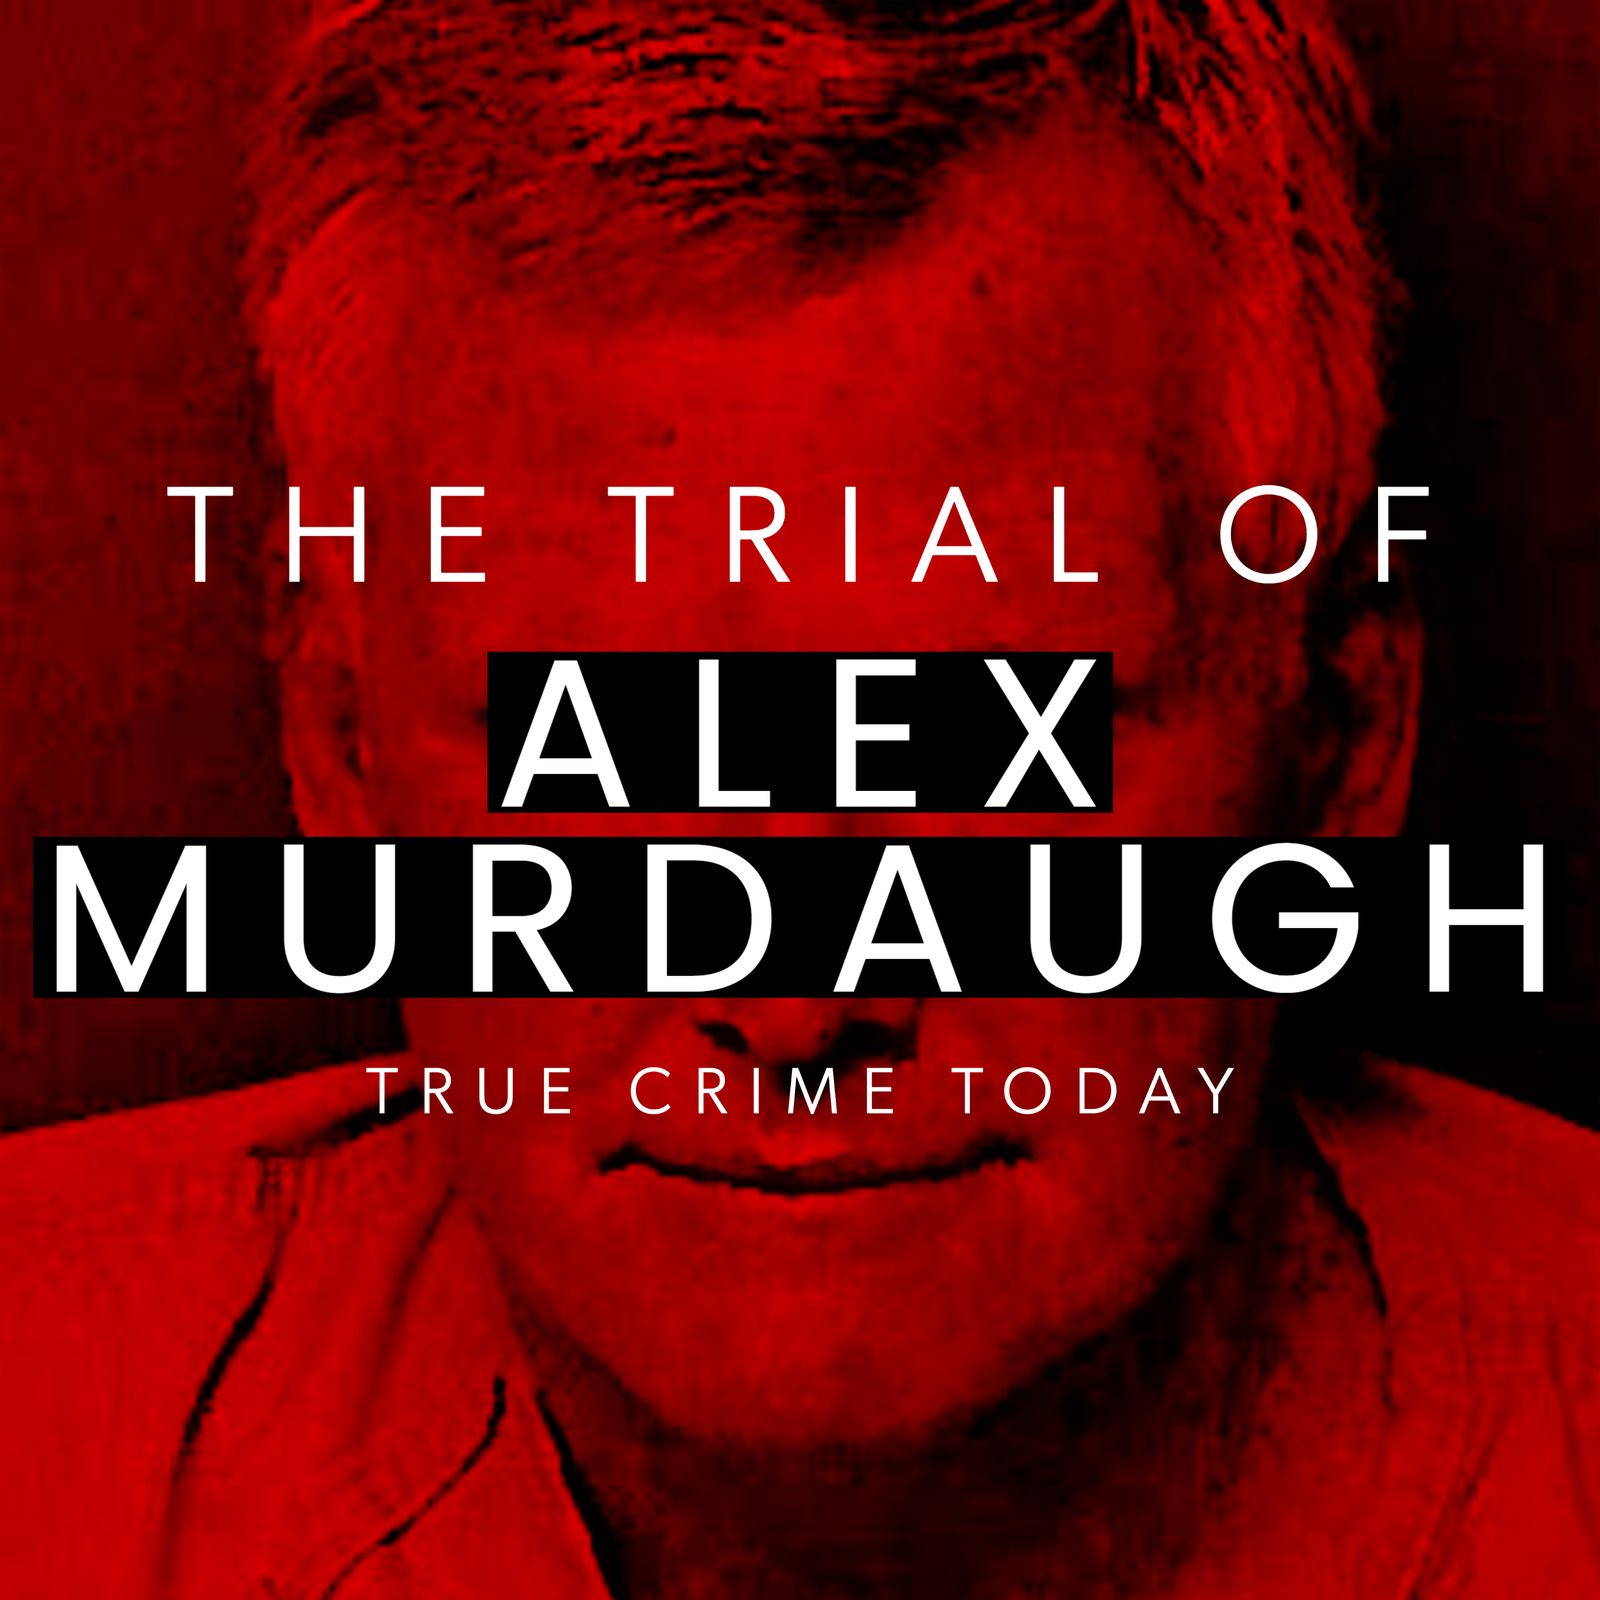 WEEK IN REVIEW-If One Alex Murdaugh Juror Claims Influence From Clerk, Is That Enough For A Re-Trial?